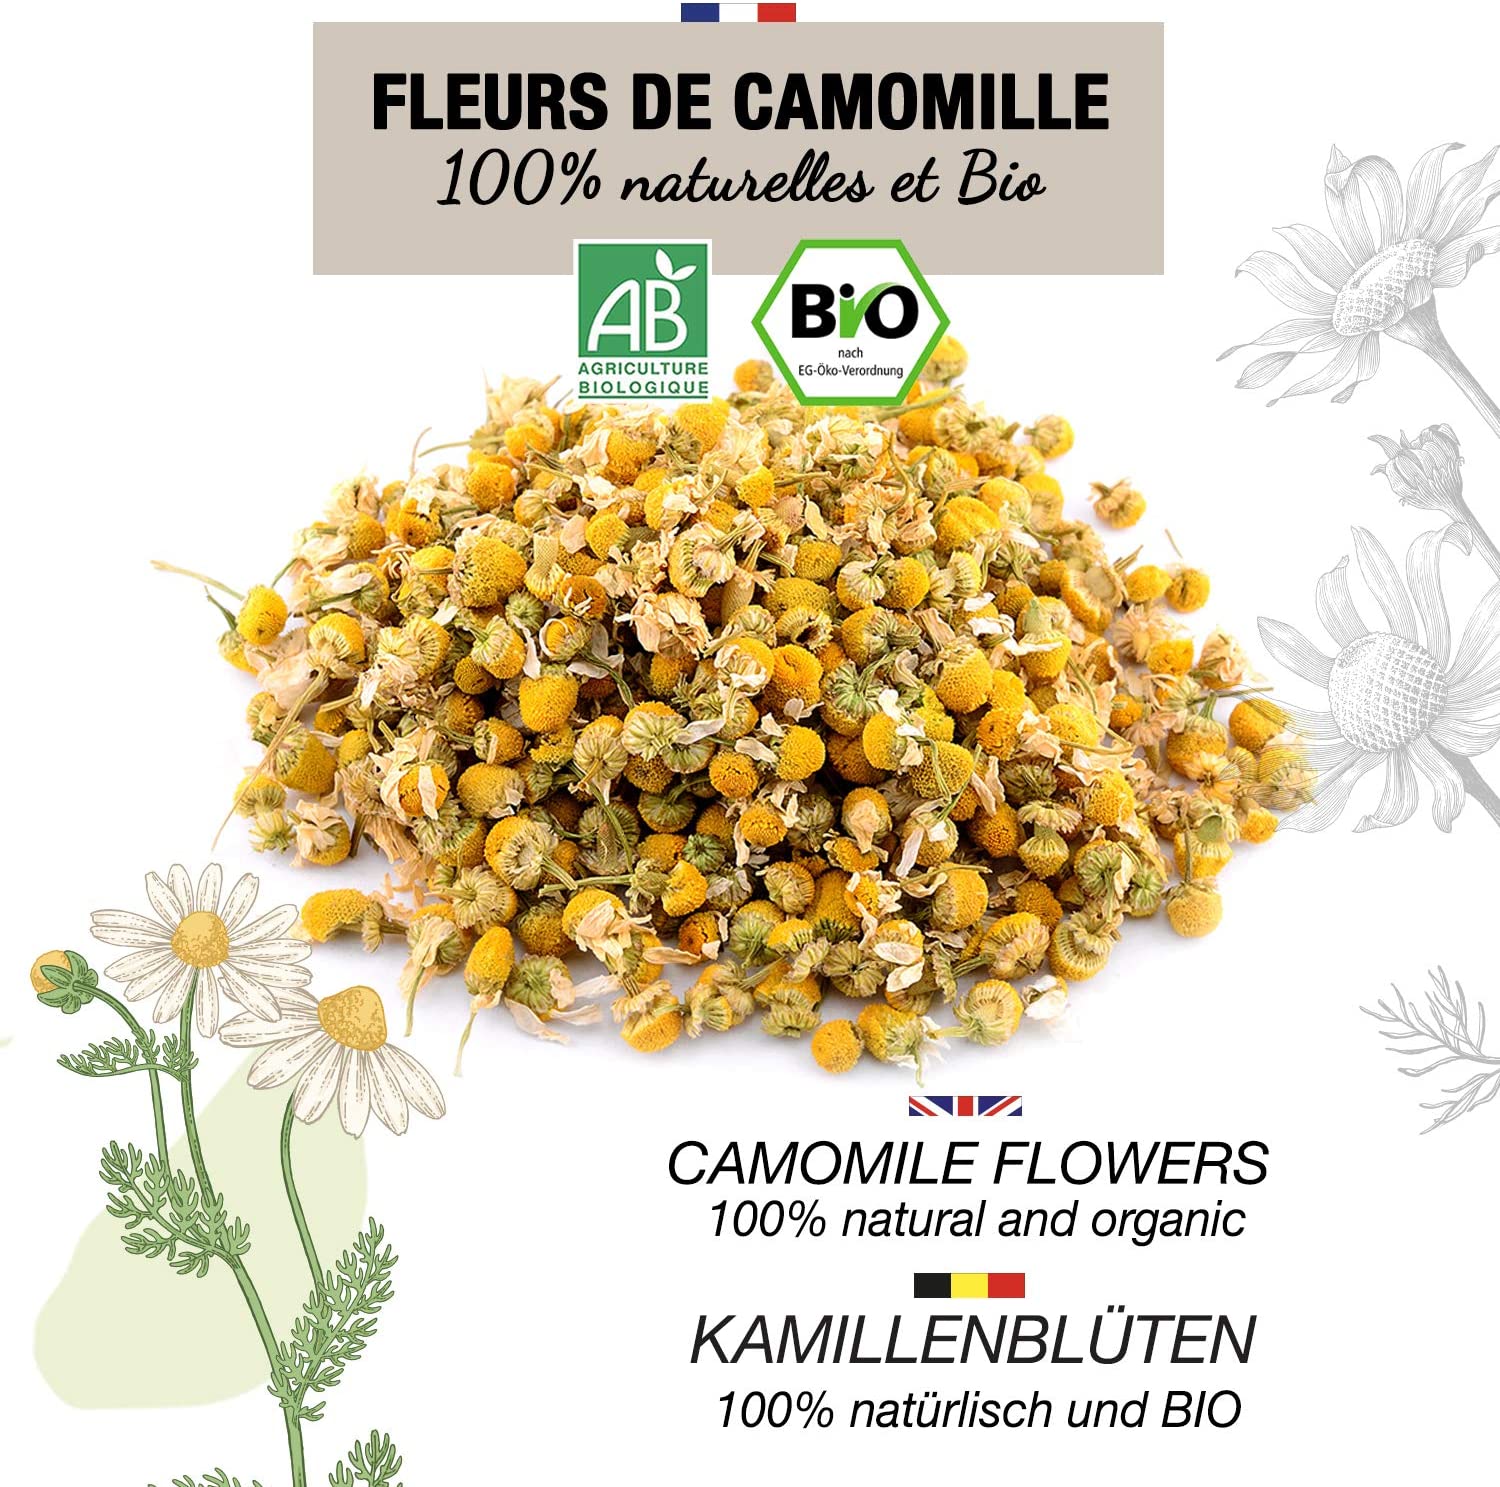 CAMOMILLE MATRICAIRE AB